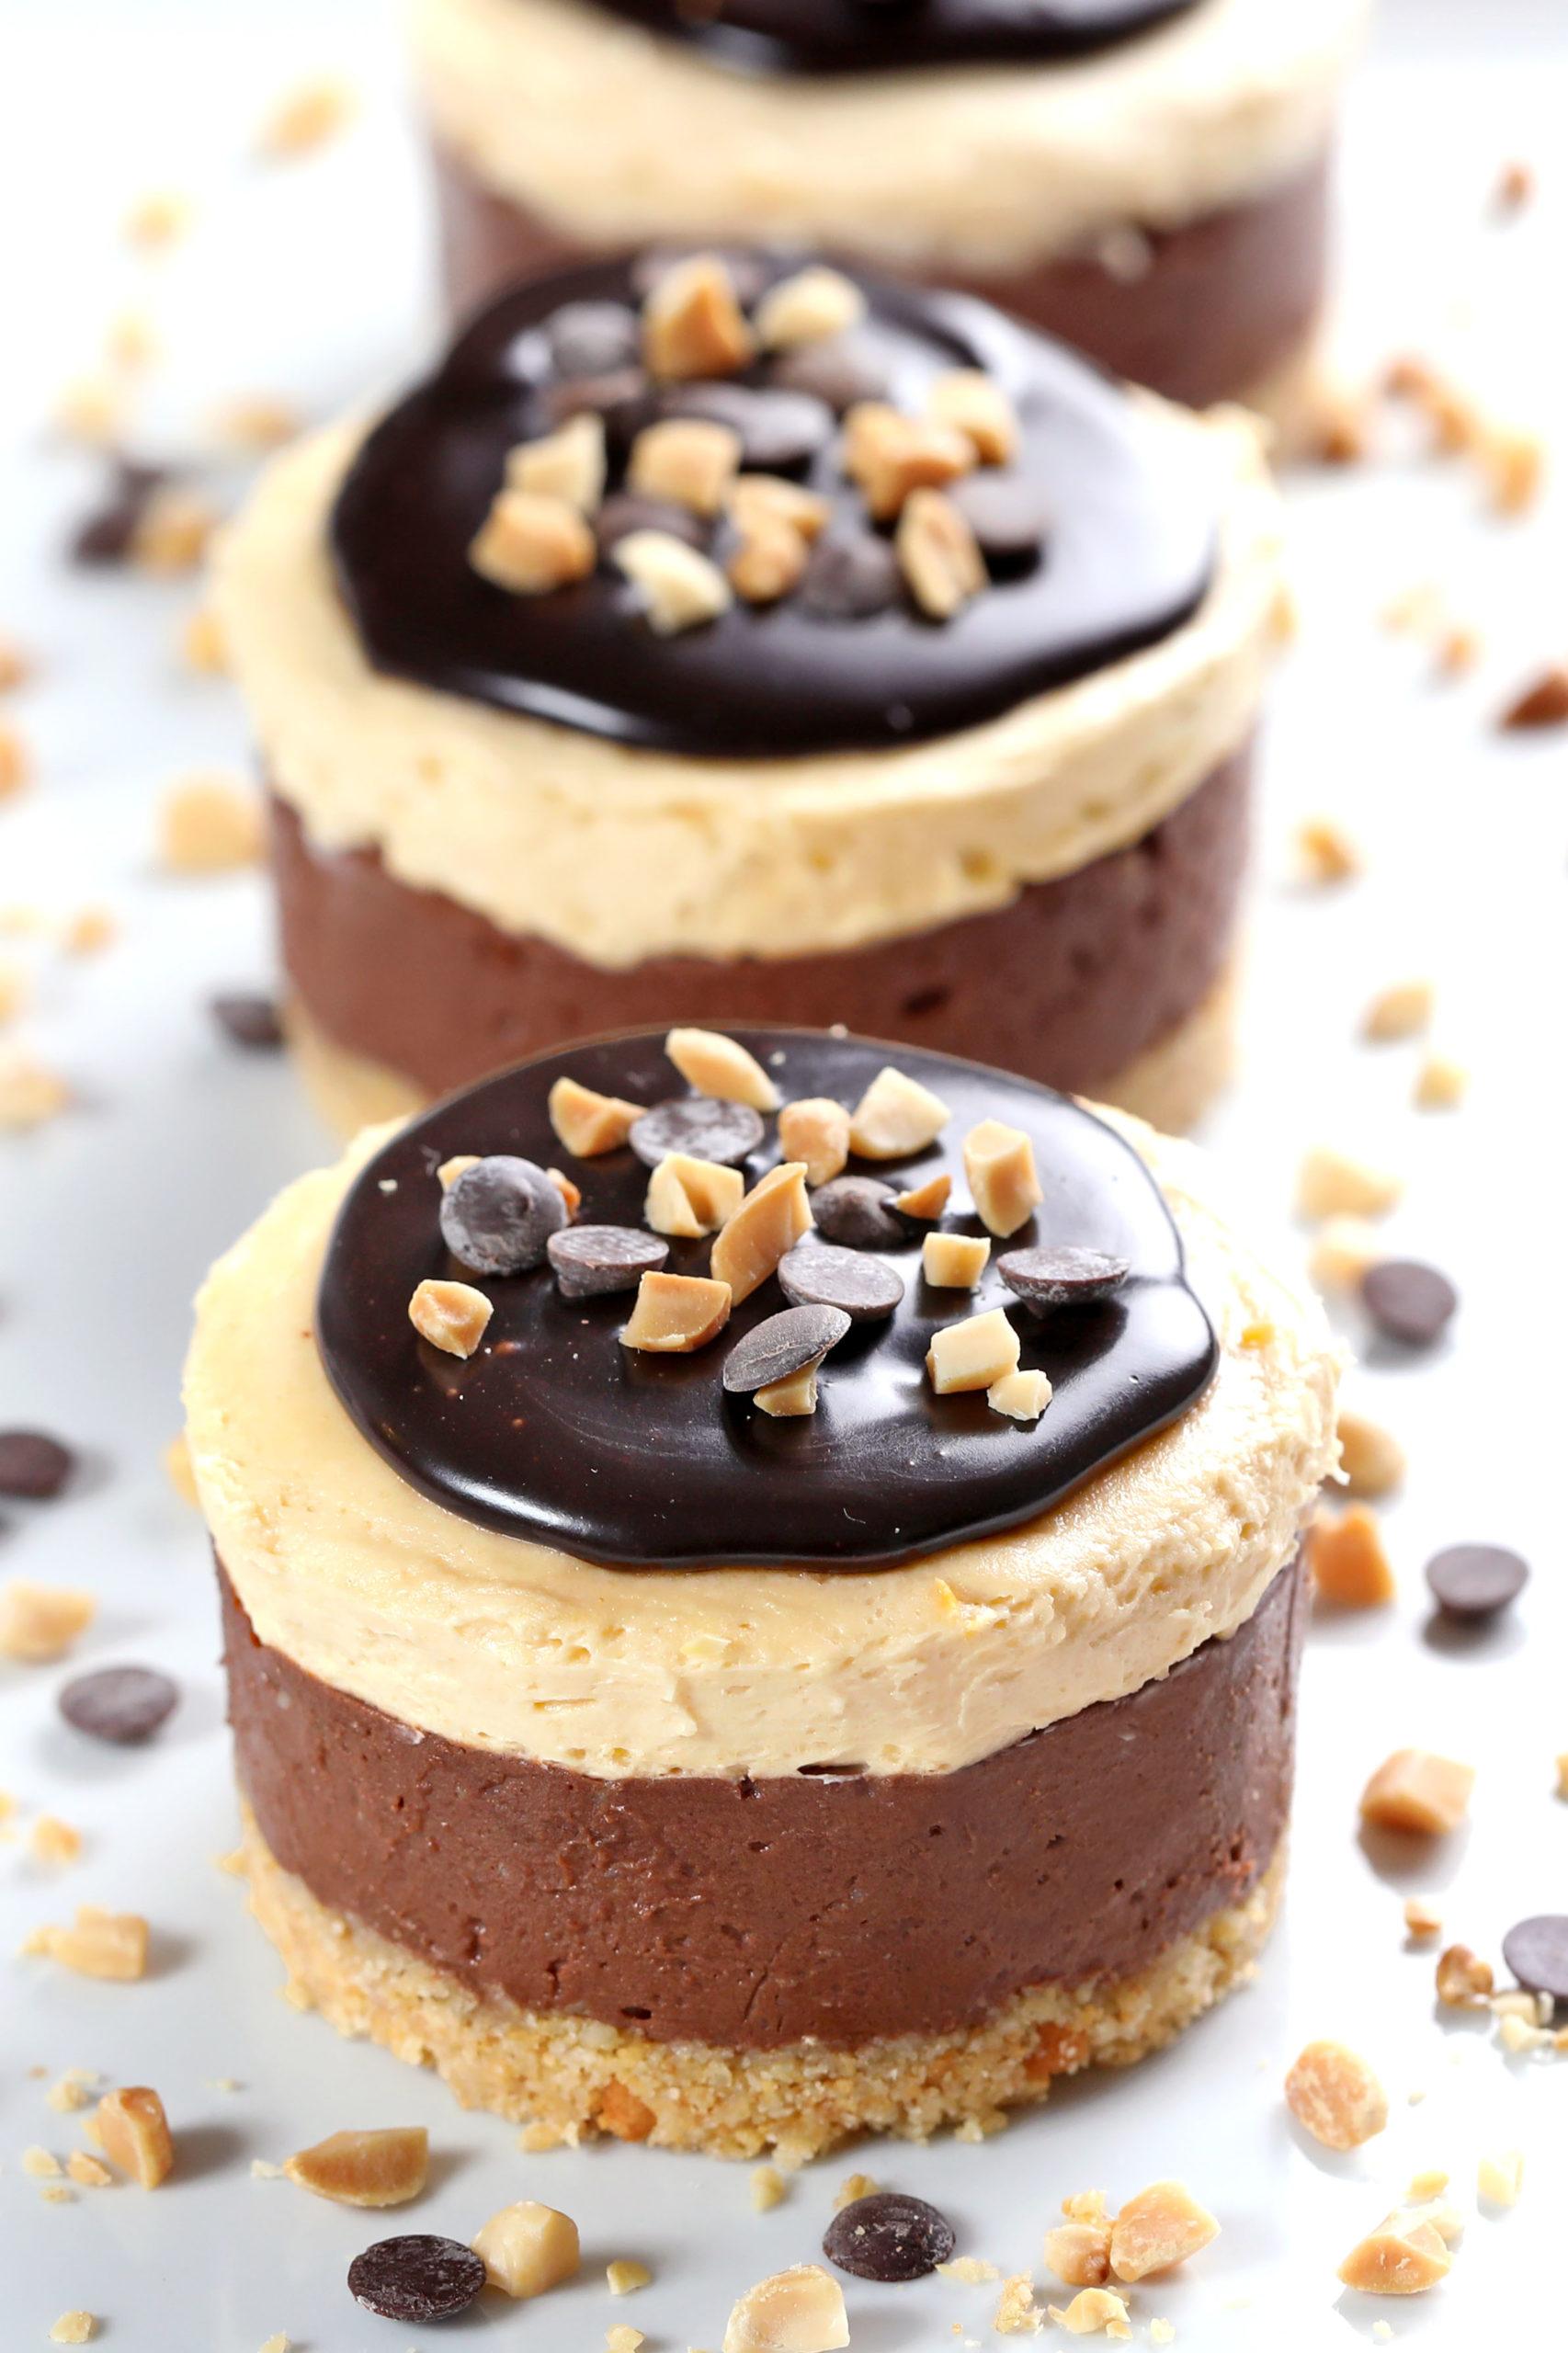 Chocolate Peanut Butter Mini Cheesecakes is an easy, no bake recipe that tastes like eating a gigantic peanut butter cup. A dream come true for peanut butter and chocolate lovers.